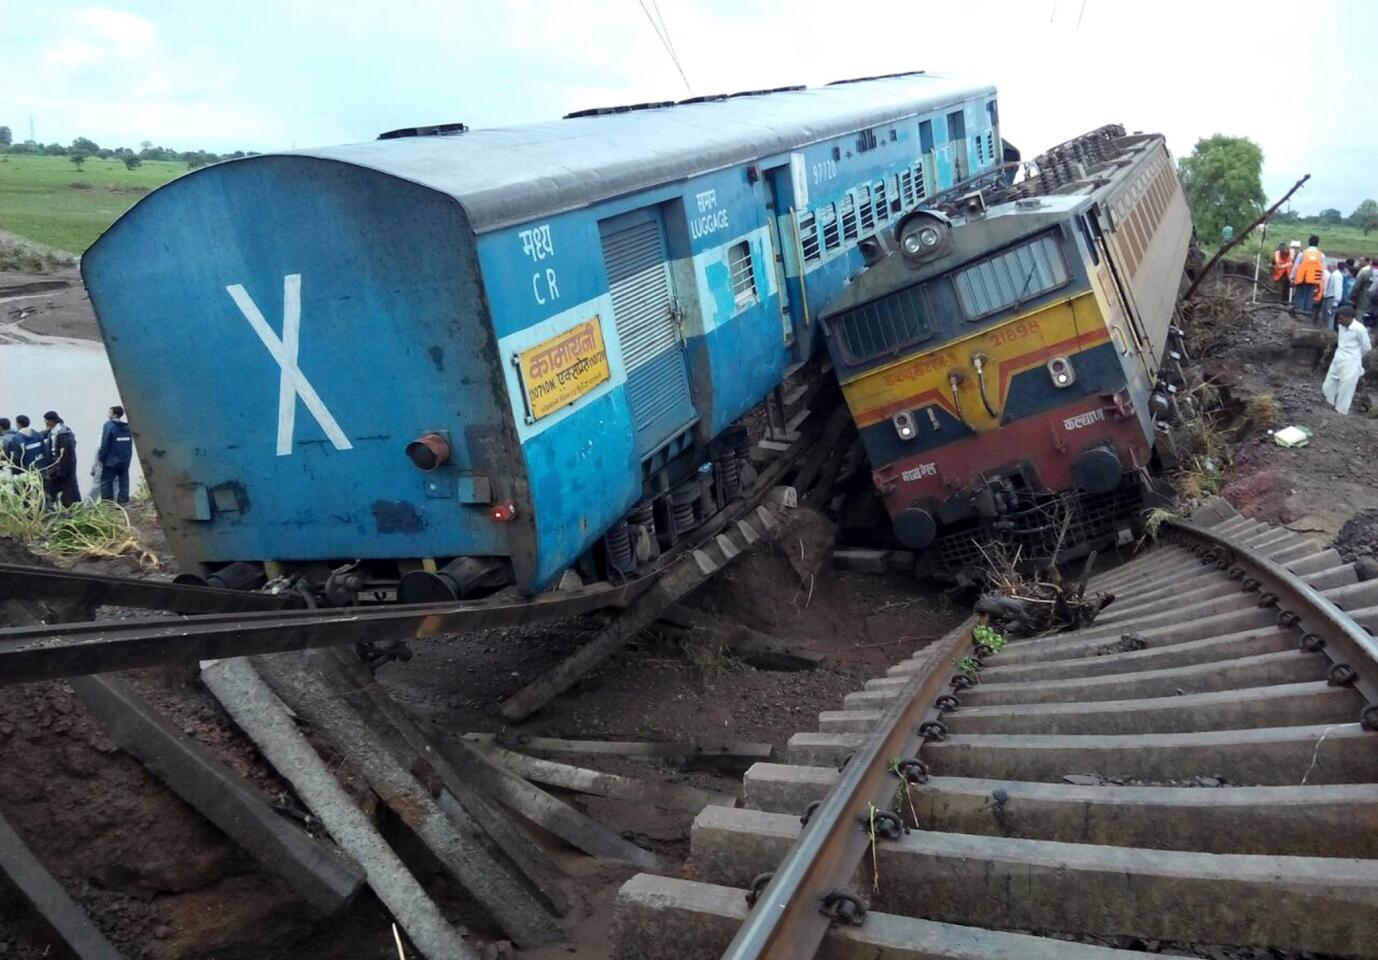 Two Indian passenger trains lay next to each other following a derailment after they were hit by flash floods on a bridge outside the town of Harda in Madhya Pradesh state on August 5, 2015. Two passenger trains derailed after being hit by flash floods on a bridge in central India, killing at least 27 people in the latest deadly accident on the nation's crumbling rail network.